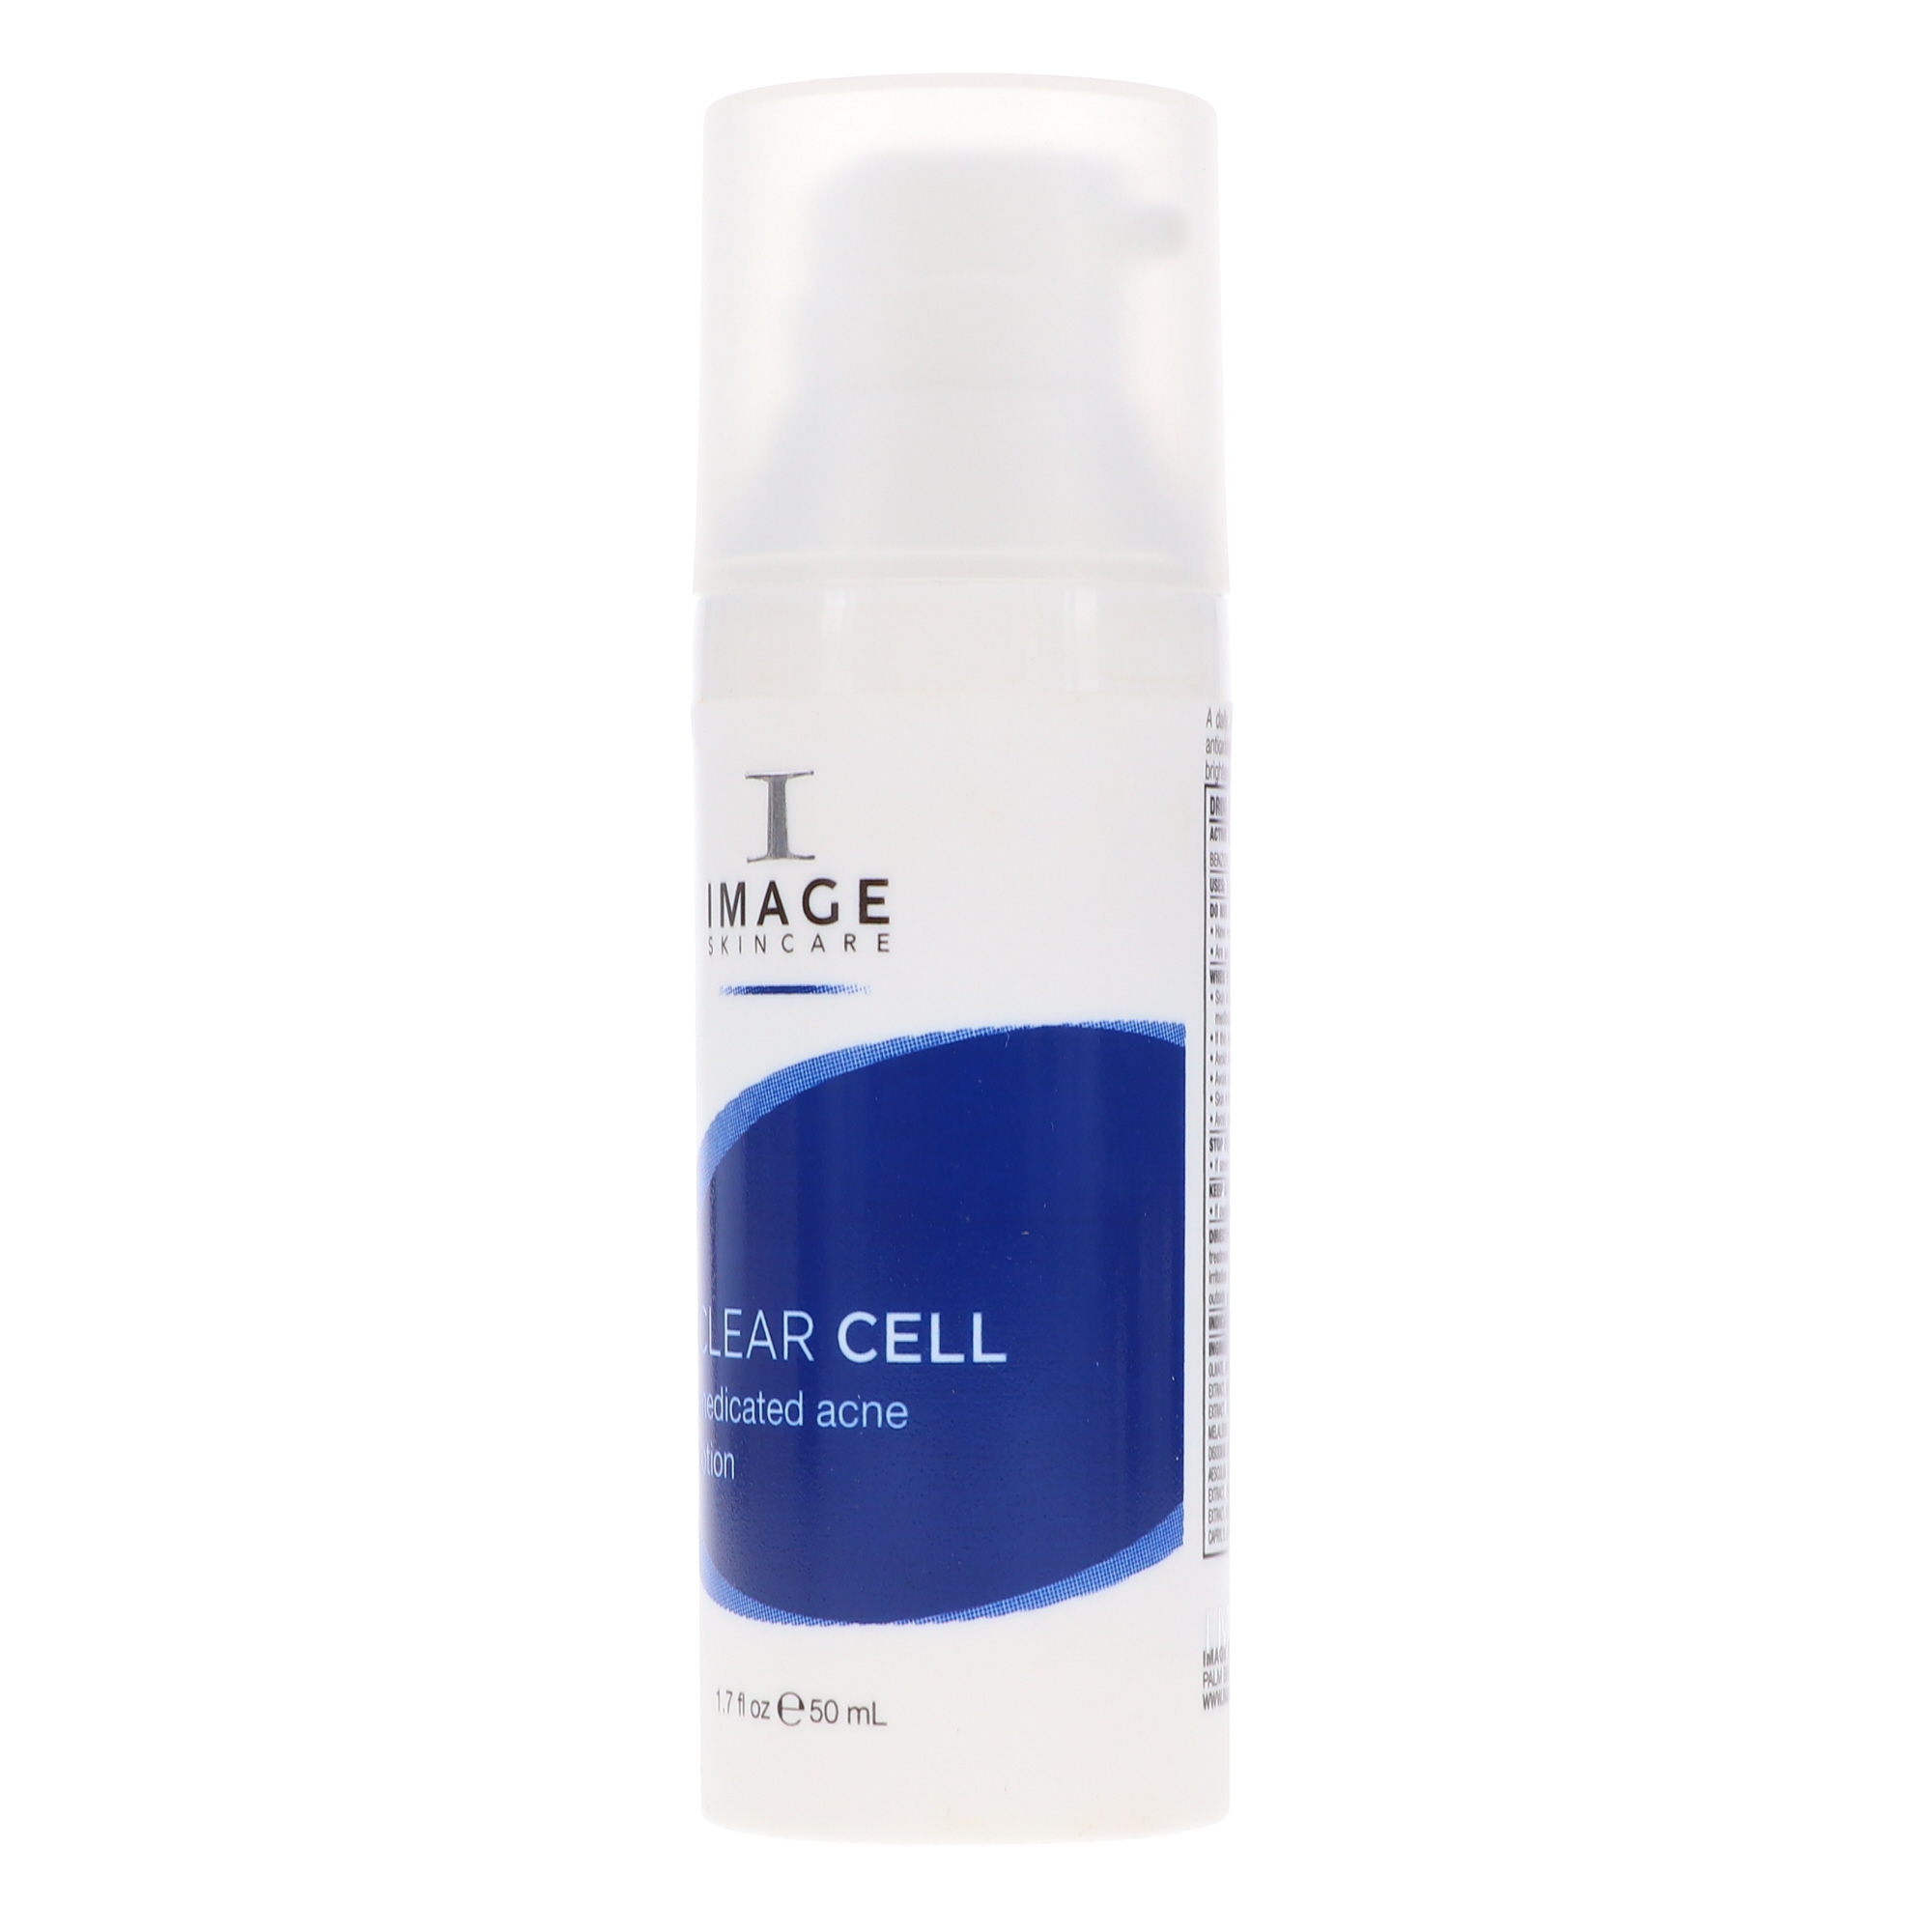 Image Clear Cell Acne Lotion, 1.7 Oz - image 2 of 8